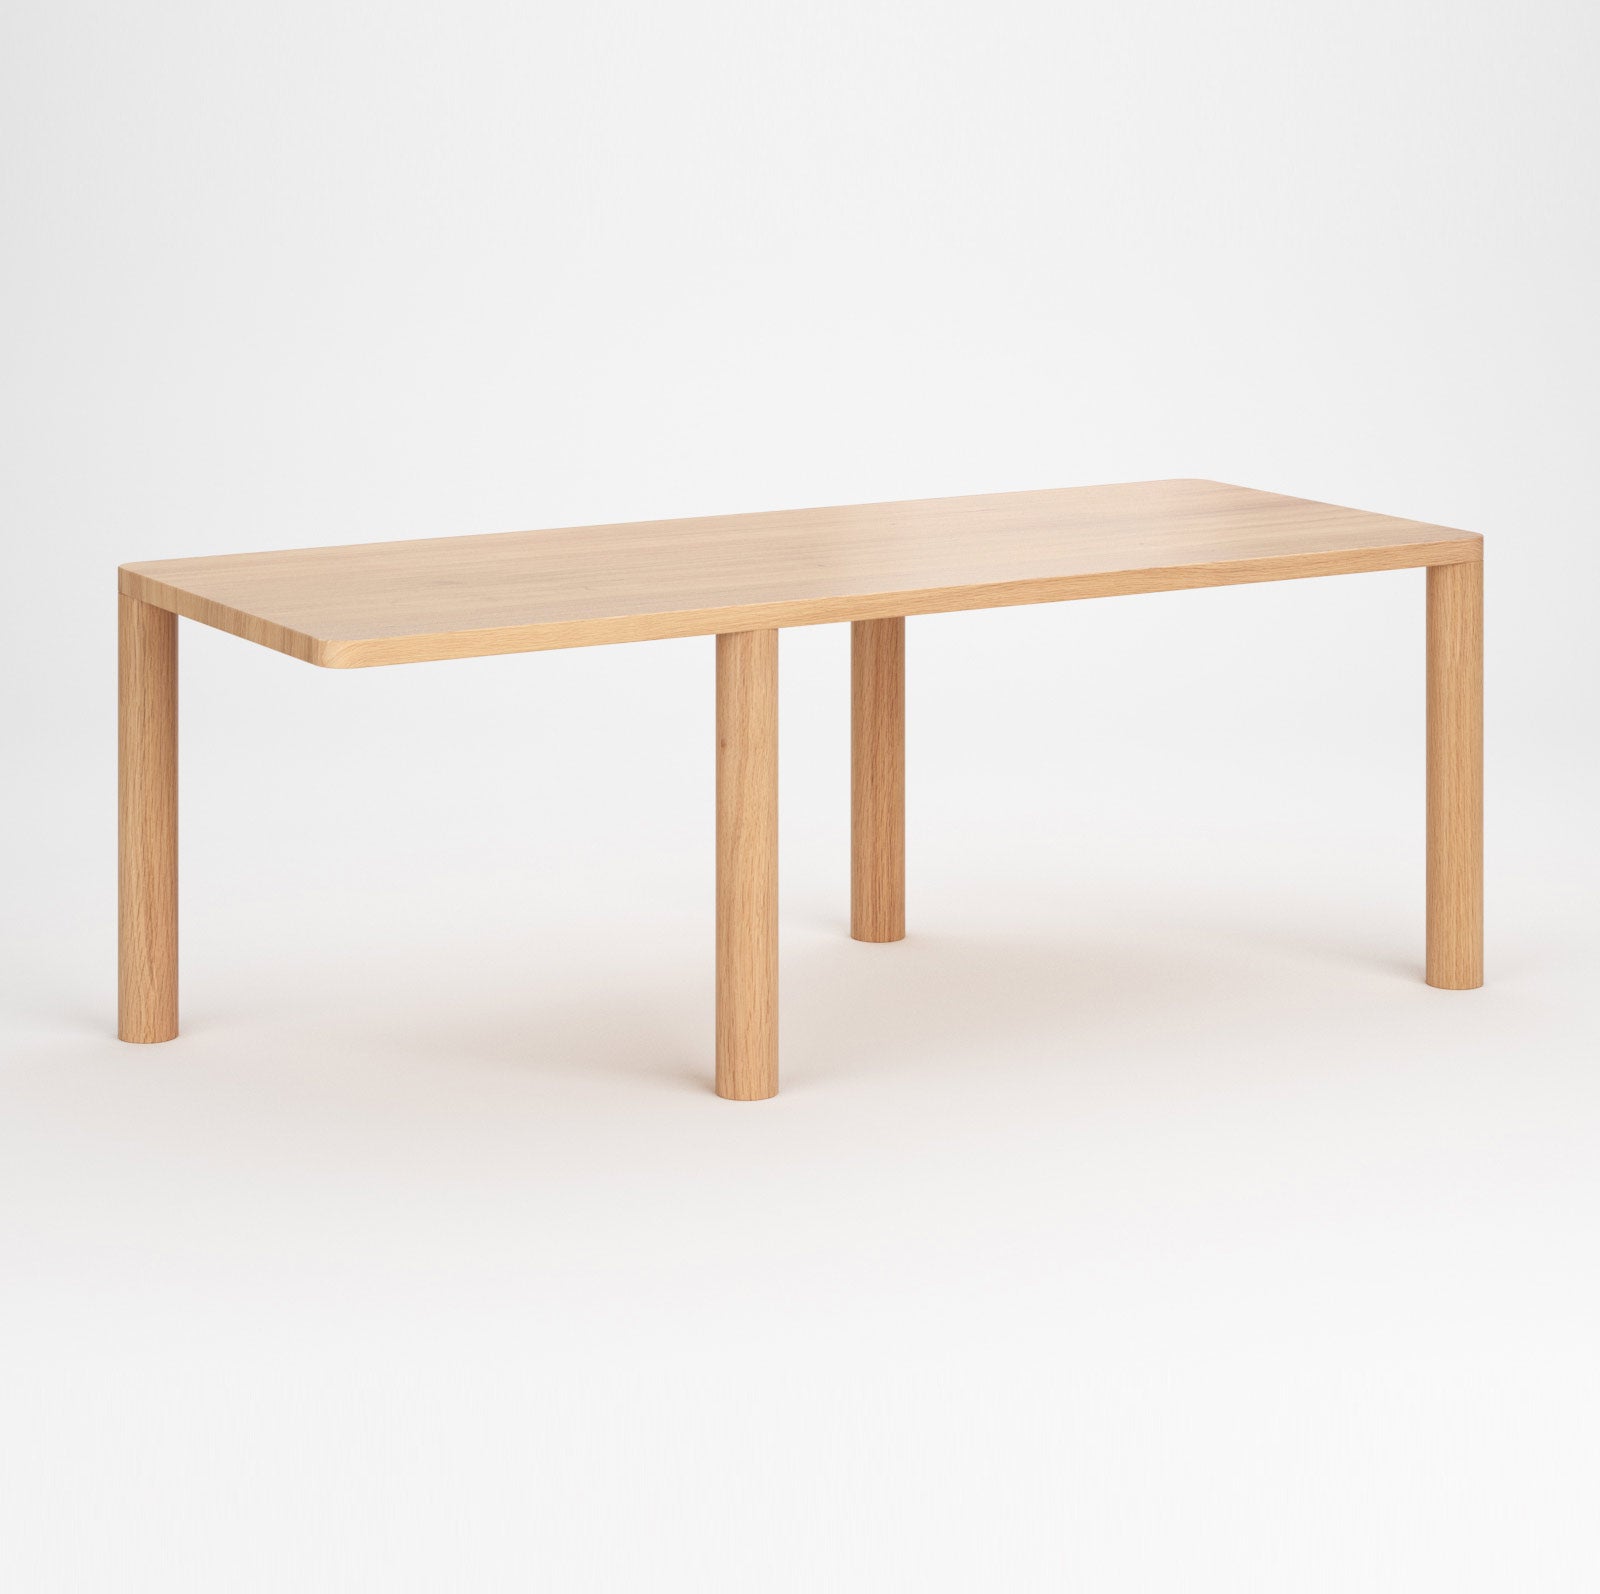 Off 214 Table T01 · €7050 · ATELIER ARETI | CURATED BY EYEDS